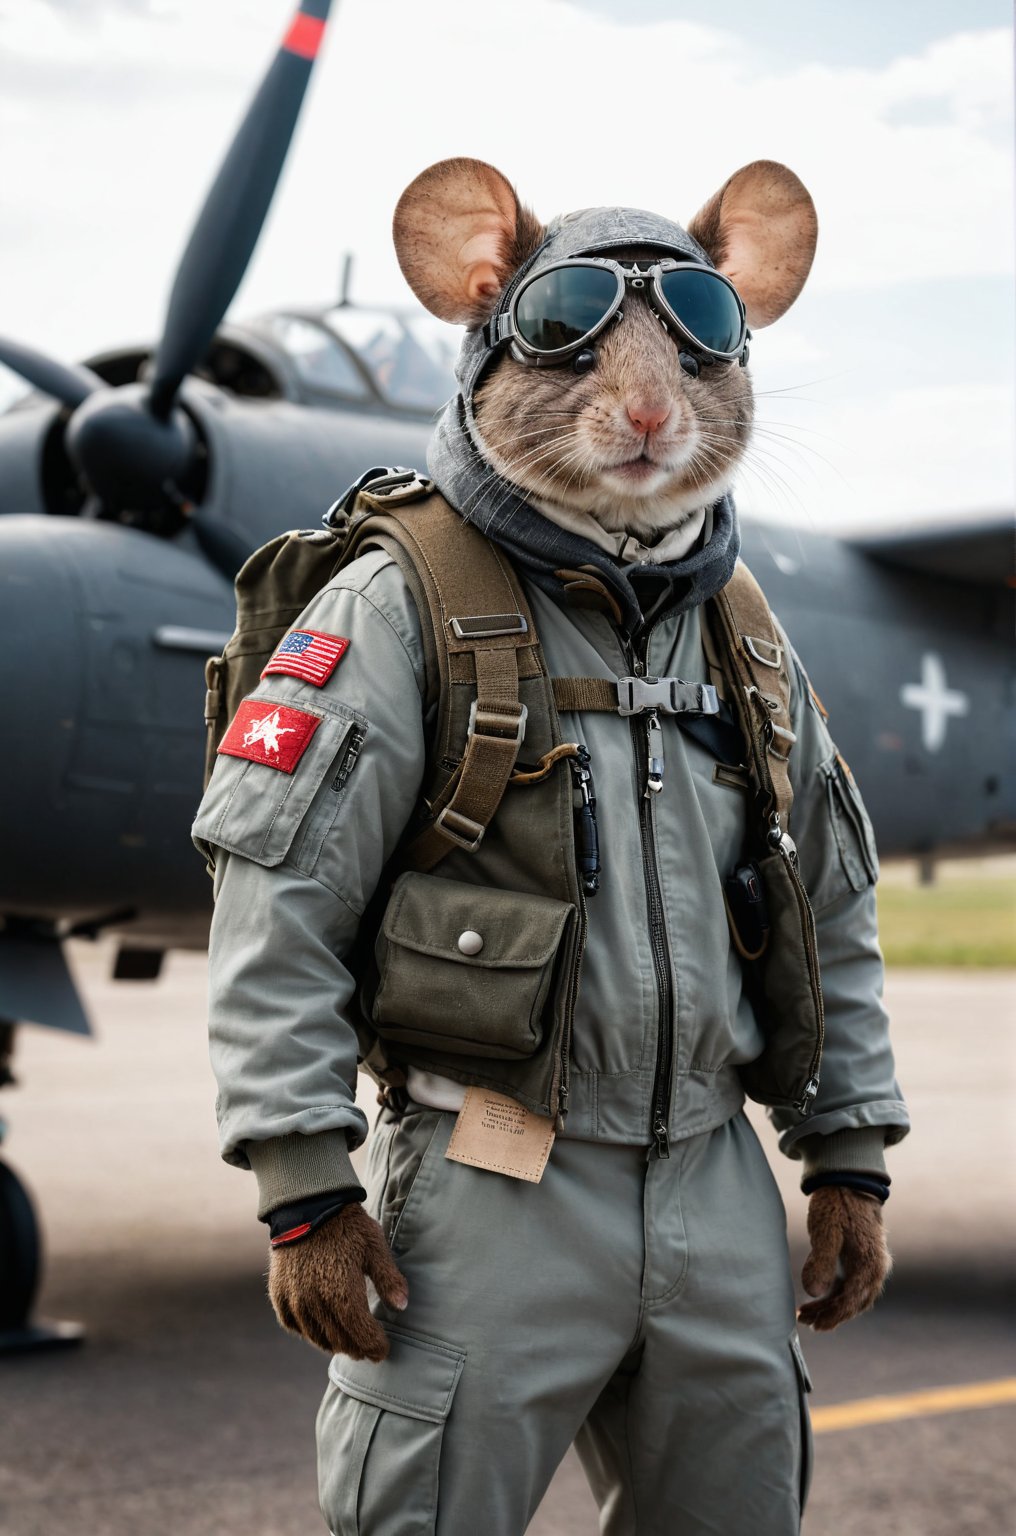 (masterpiece:1.4), professional photograhy, a small gray mouse, stands on two legs
BRAKE
military pilot's jacket
BRAKE
  pilot scarf,
BRAKE
pilot goggles
BRRAKE
bomber as background
BRAKE
upper body shot, (cienematic light:1.3), shot on Lumix GH5 
(cinematic bokeh, dynamic range, vibrant colors)